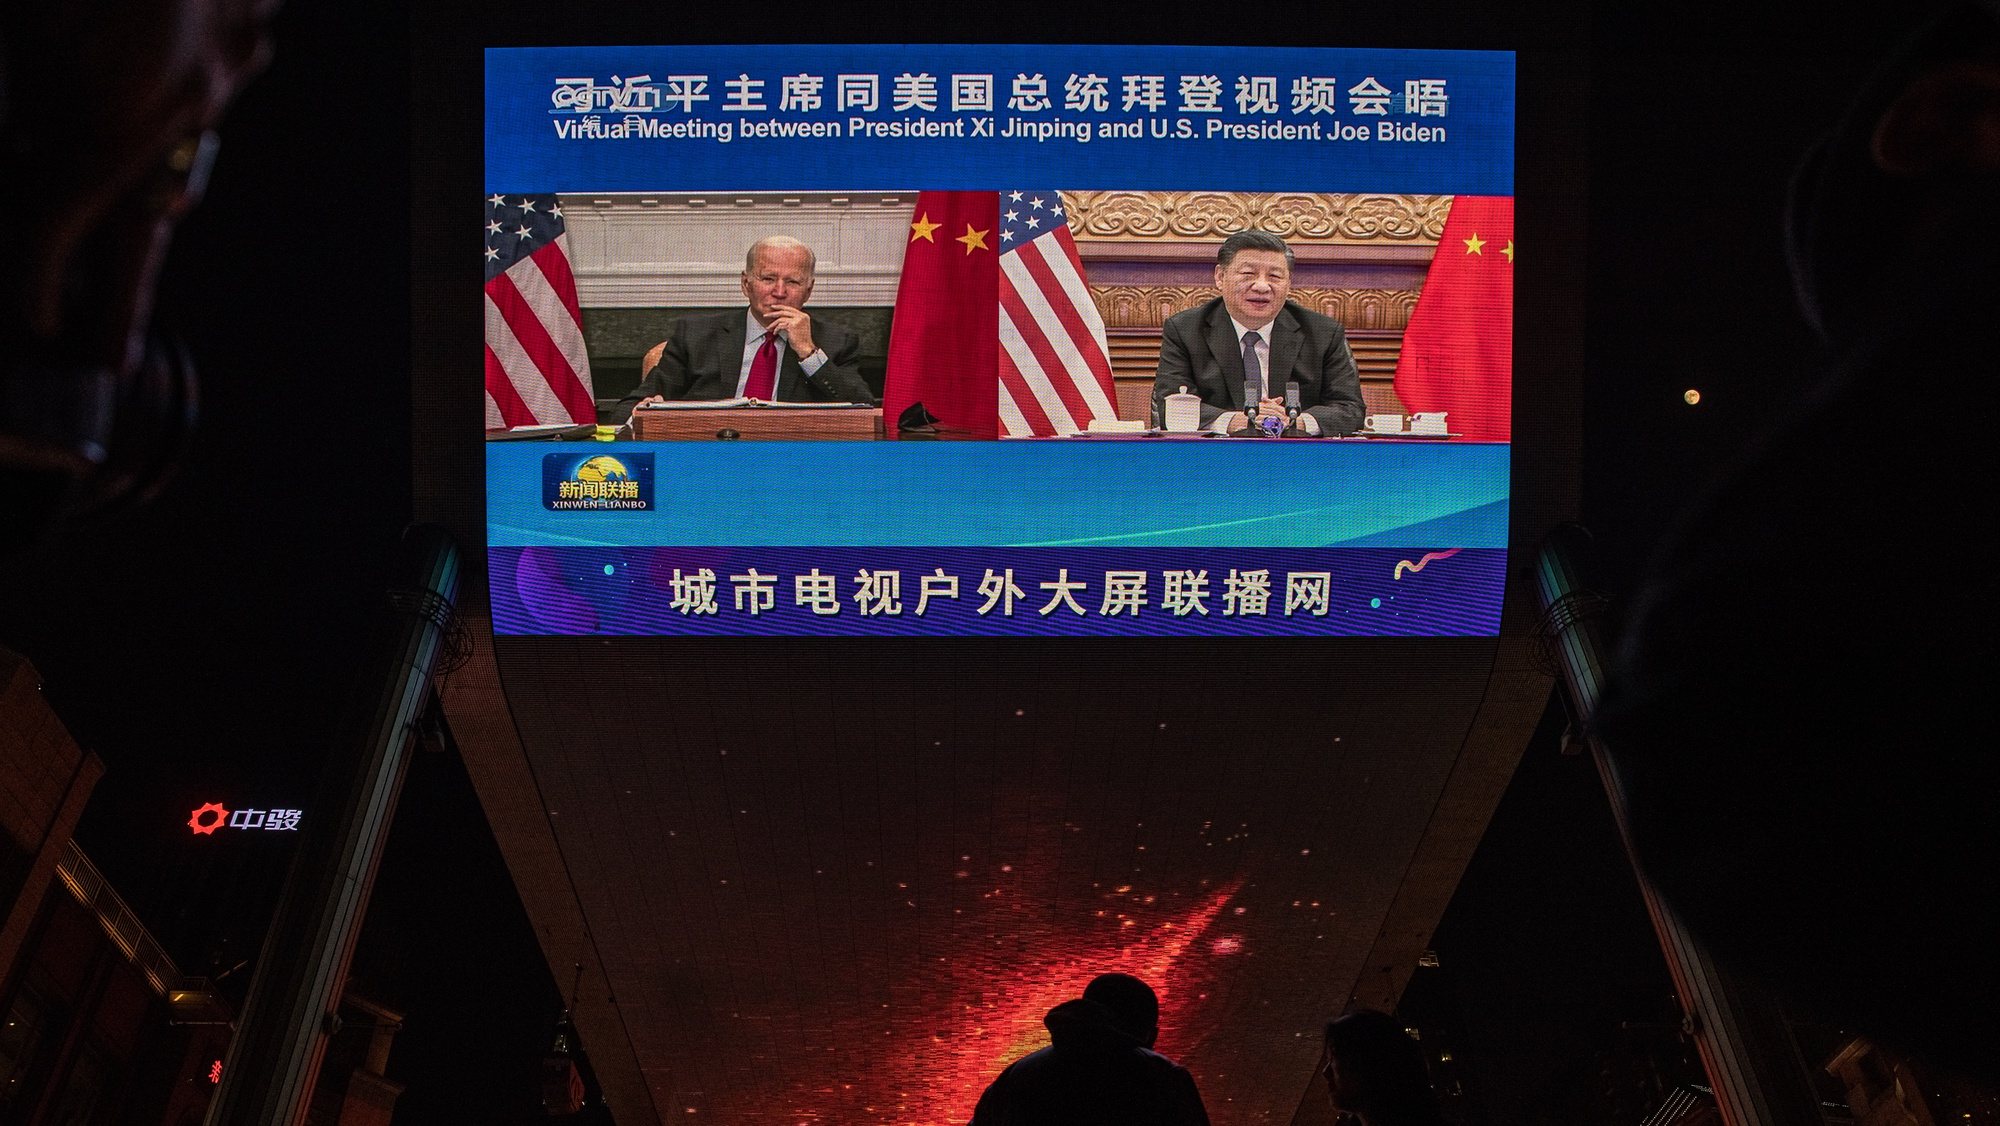 epa09585287 People stand in front of a big screen showing US President Joe Biden (L) and Chinese President Xi Jinping attending their virtual summit, during the evening news program, in Beijing, China, 16 November 2021. US President Joe Biden and Chinese President Xi Jinping had their first face-to-face virtual summit amid the political and economic tensions between the two countries.  EPA-EFE/ROMAN PILIPEY